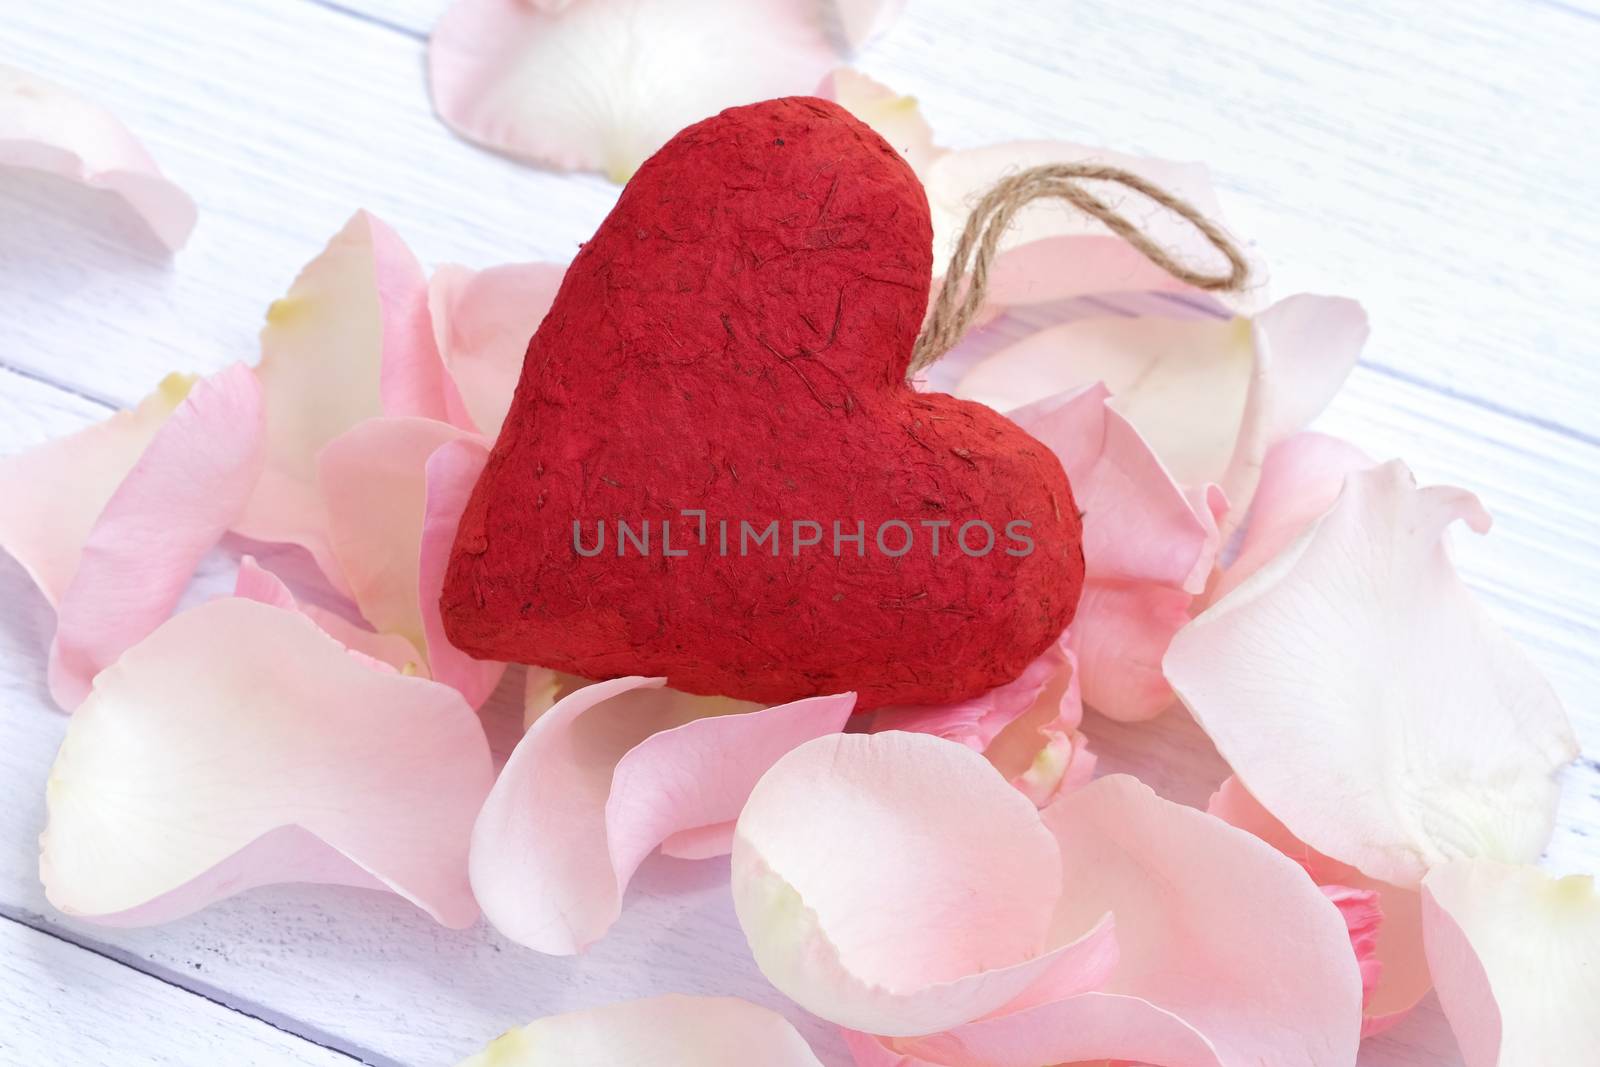 A red paper mache heart on a bed of pink rose petals by Nawoot